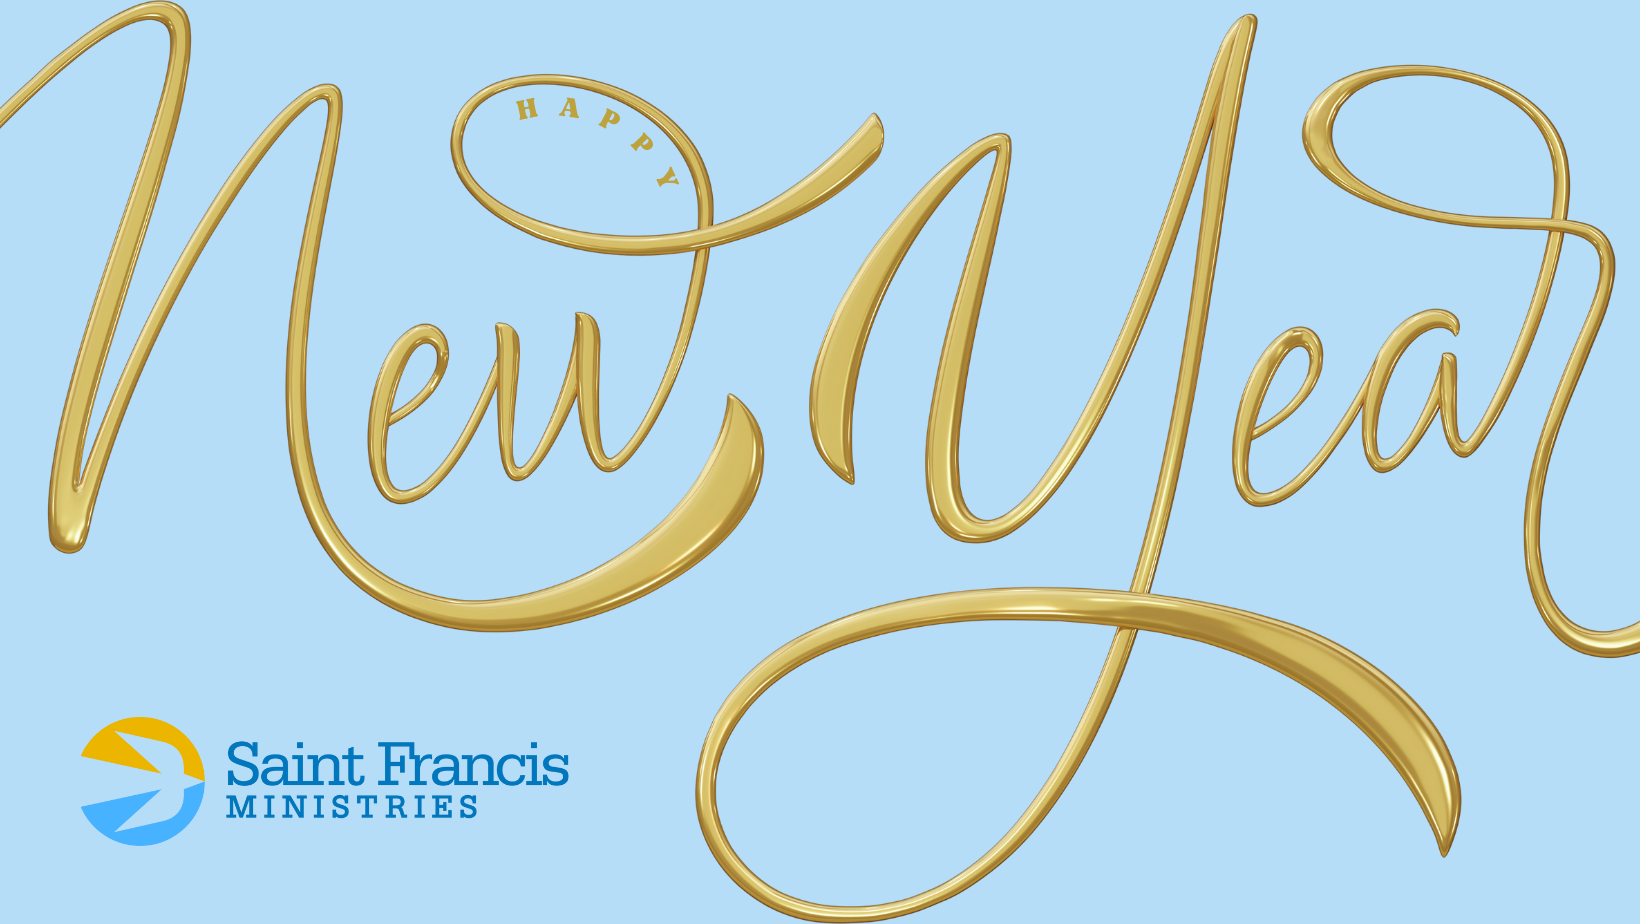 Golden cursive text reads "Happy New Year" on a light blue background. The Saint Francis Ministries logo, featuring a stylized bird and text, is placed in the lower left corner.